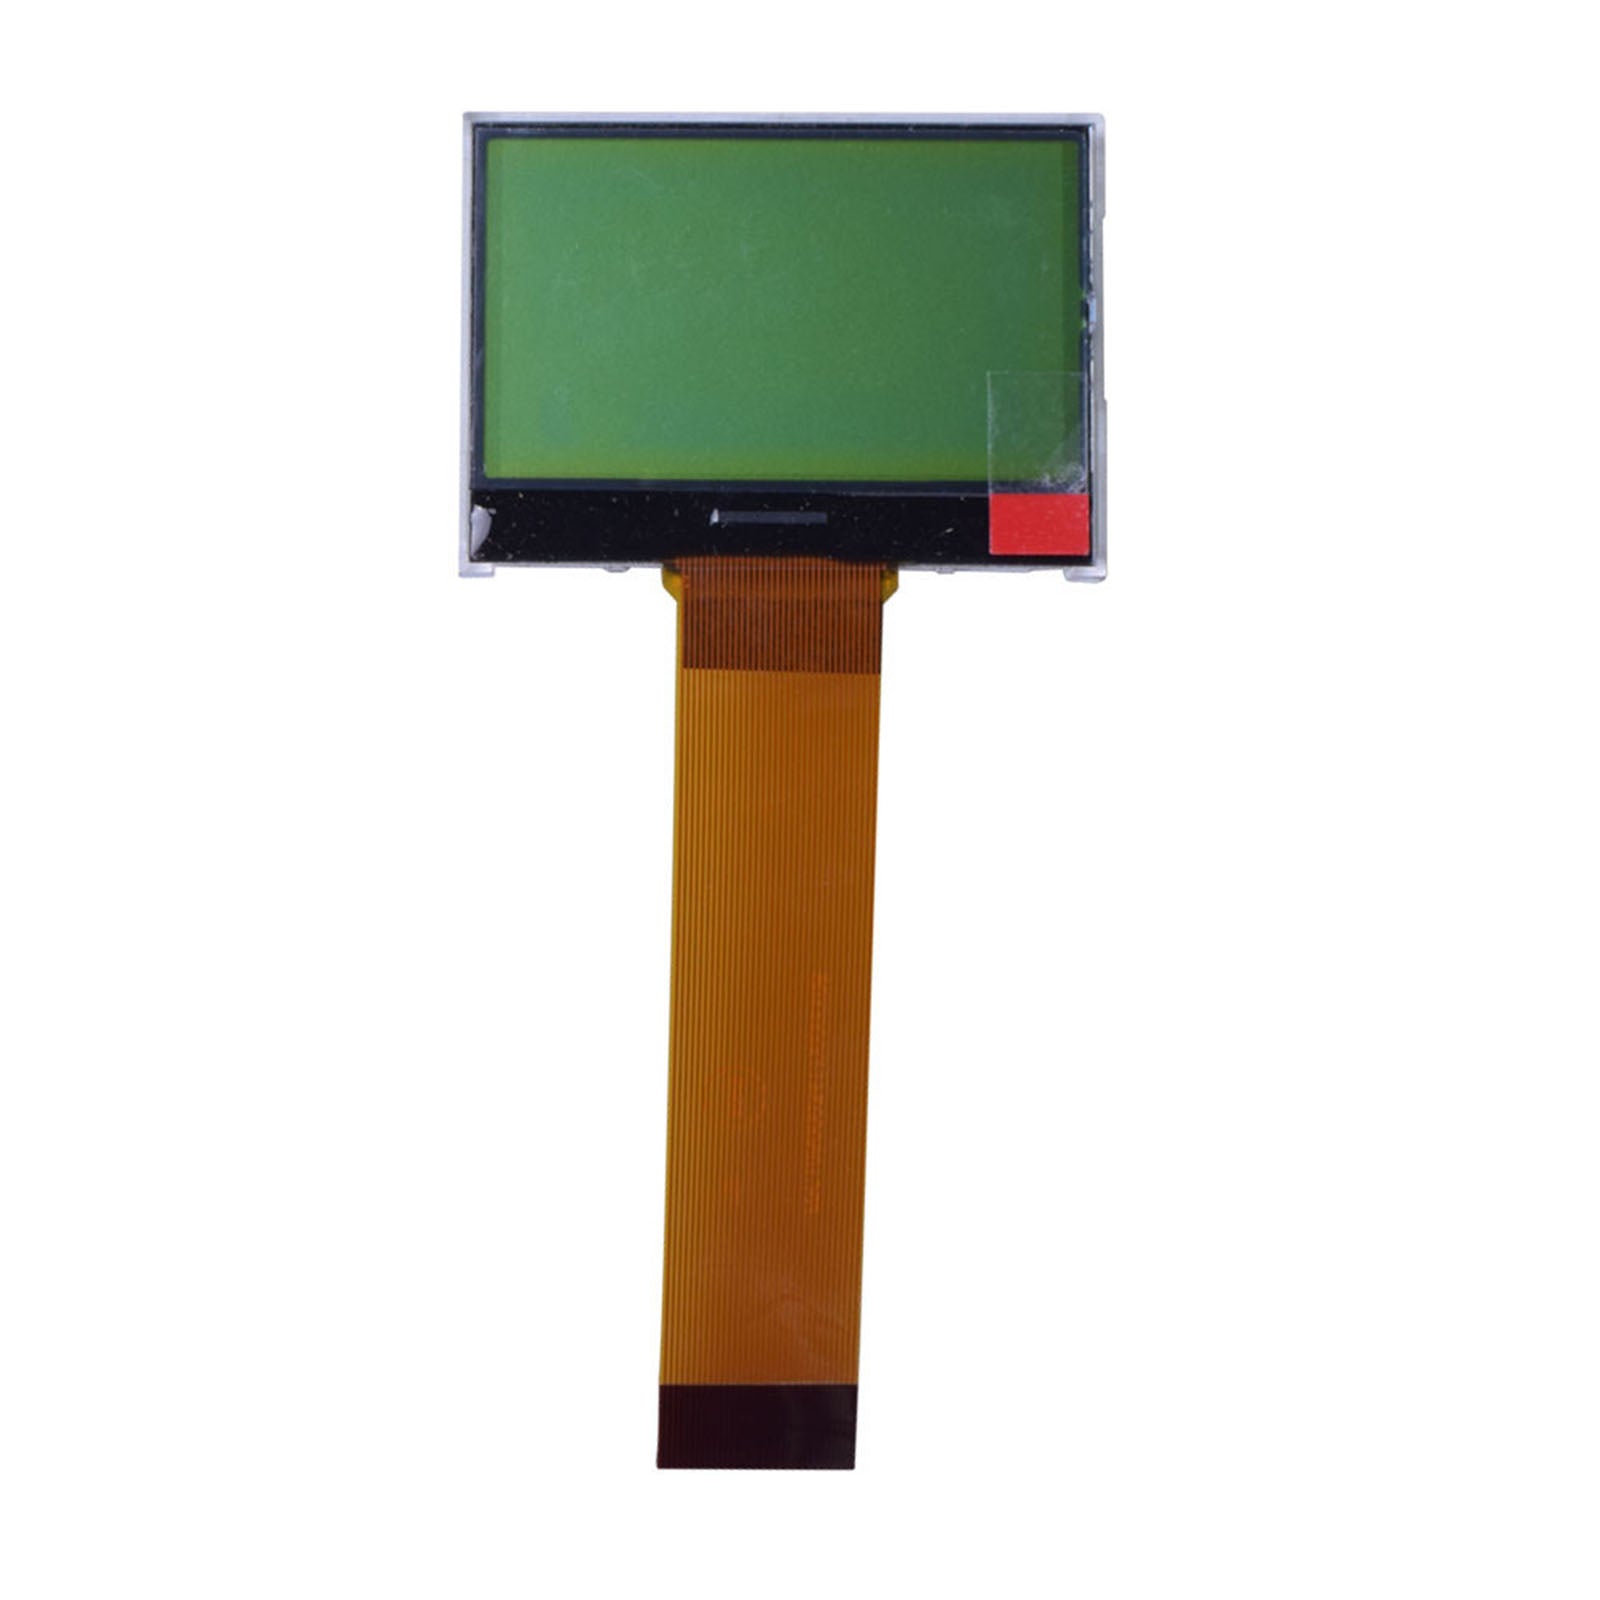 128x64 COG LCD 2.07 inch graphic display with MCU and SPI interfaces